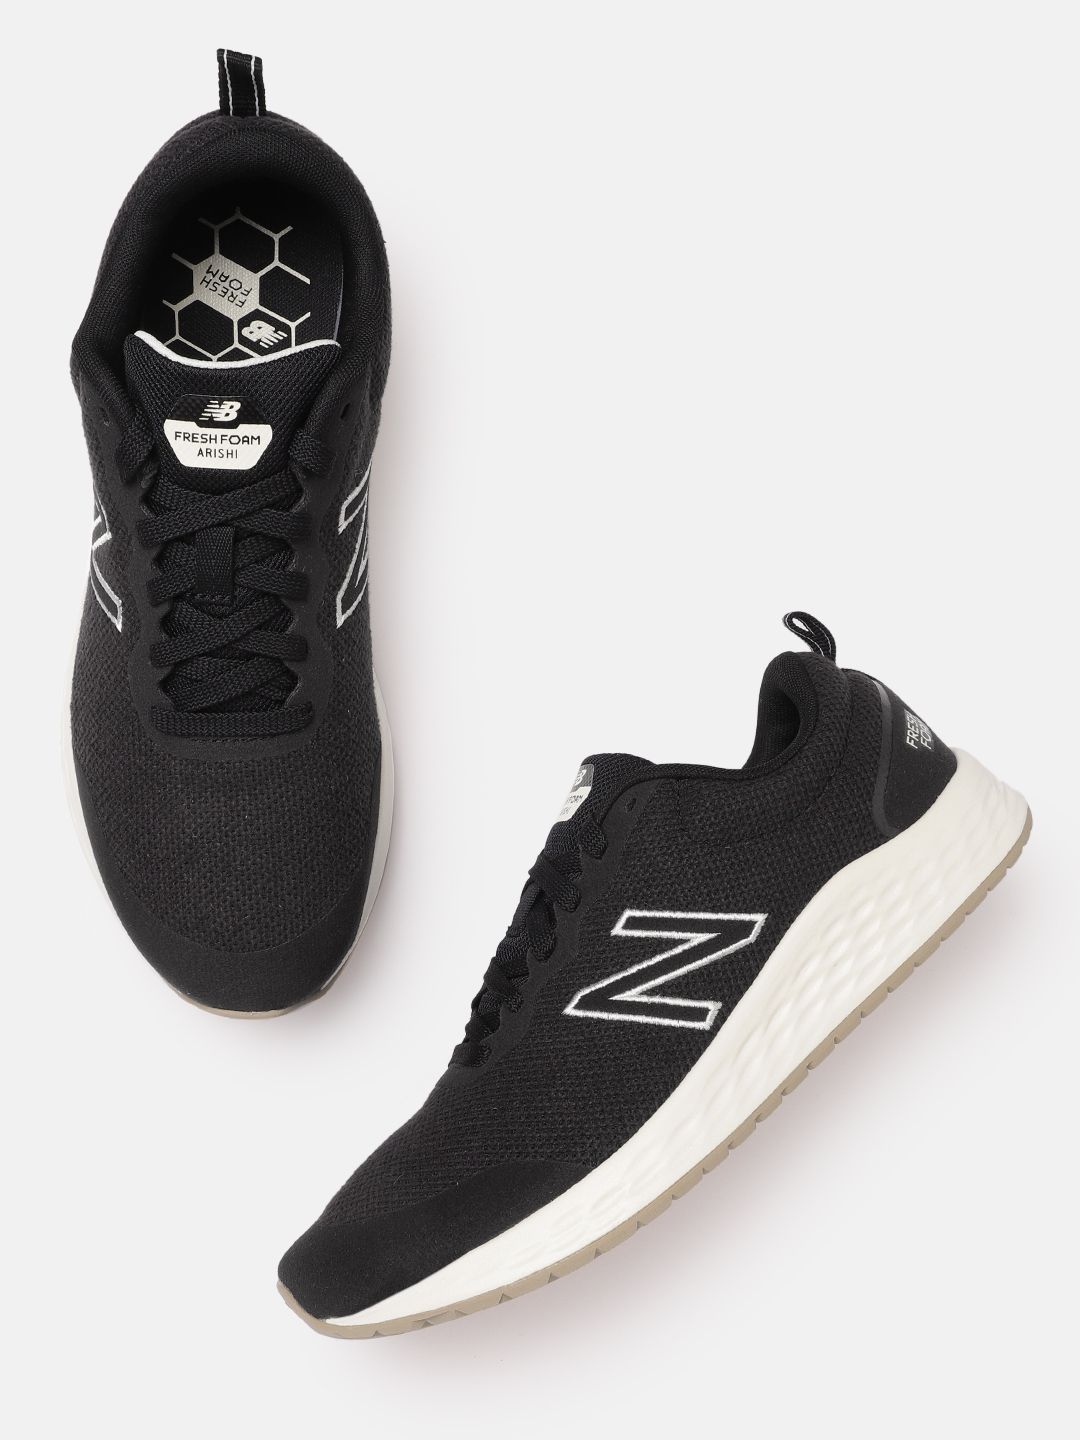 New Balance Women Black Woven Design Running Shoes Price in India